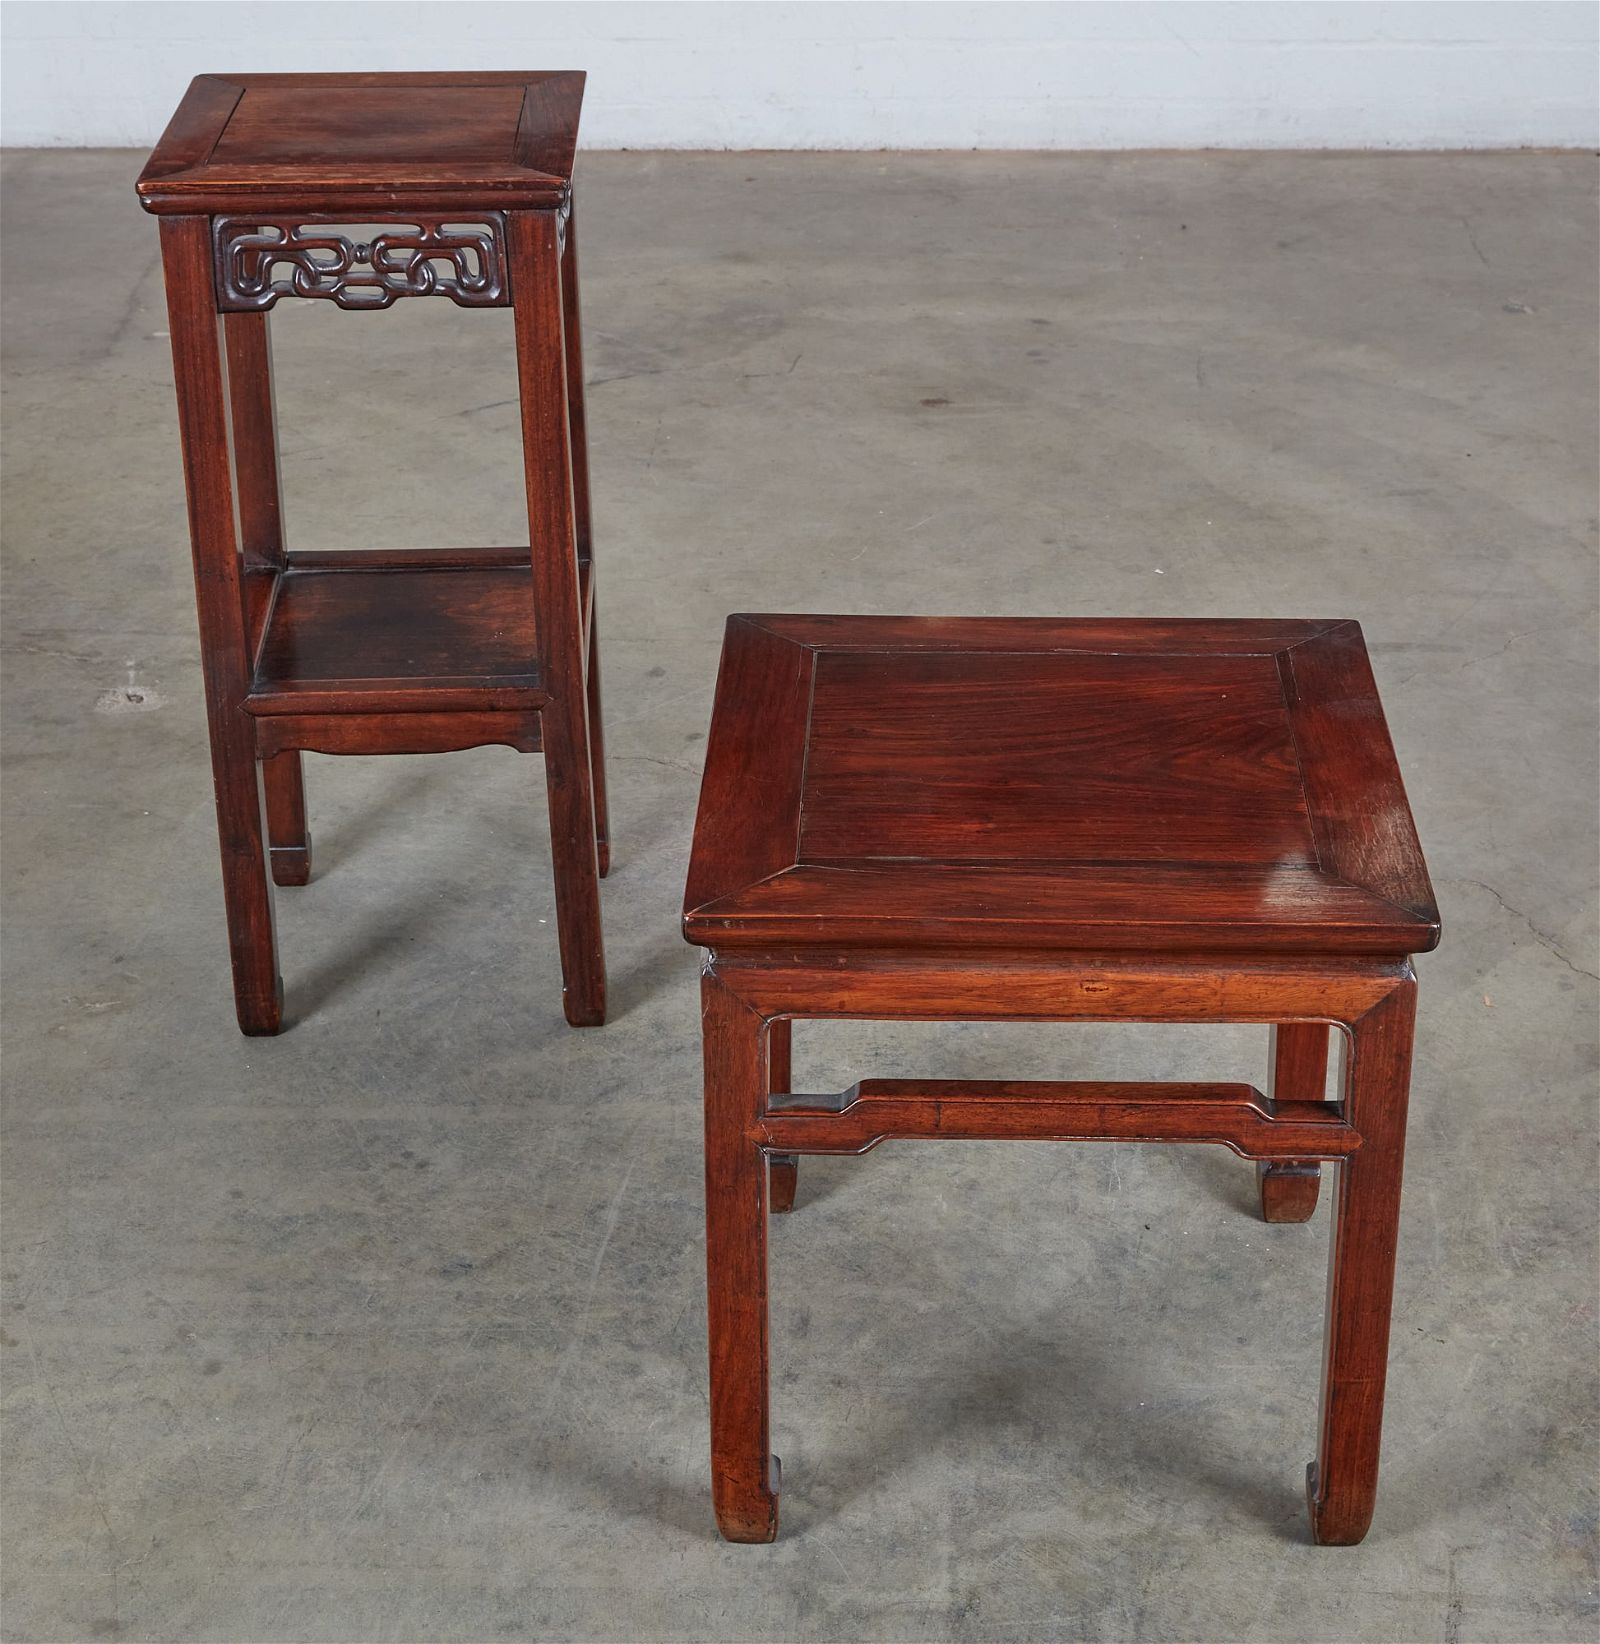 TWO CHINESE EXPORT HARDWOOD TABLESTwo 2fb4020